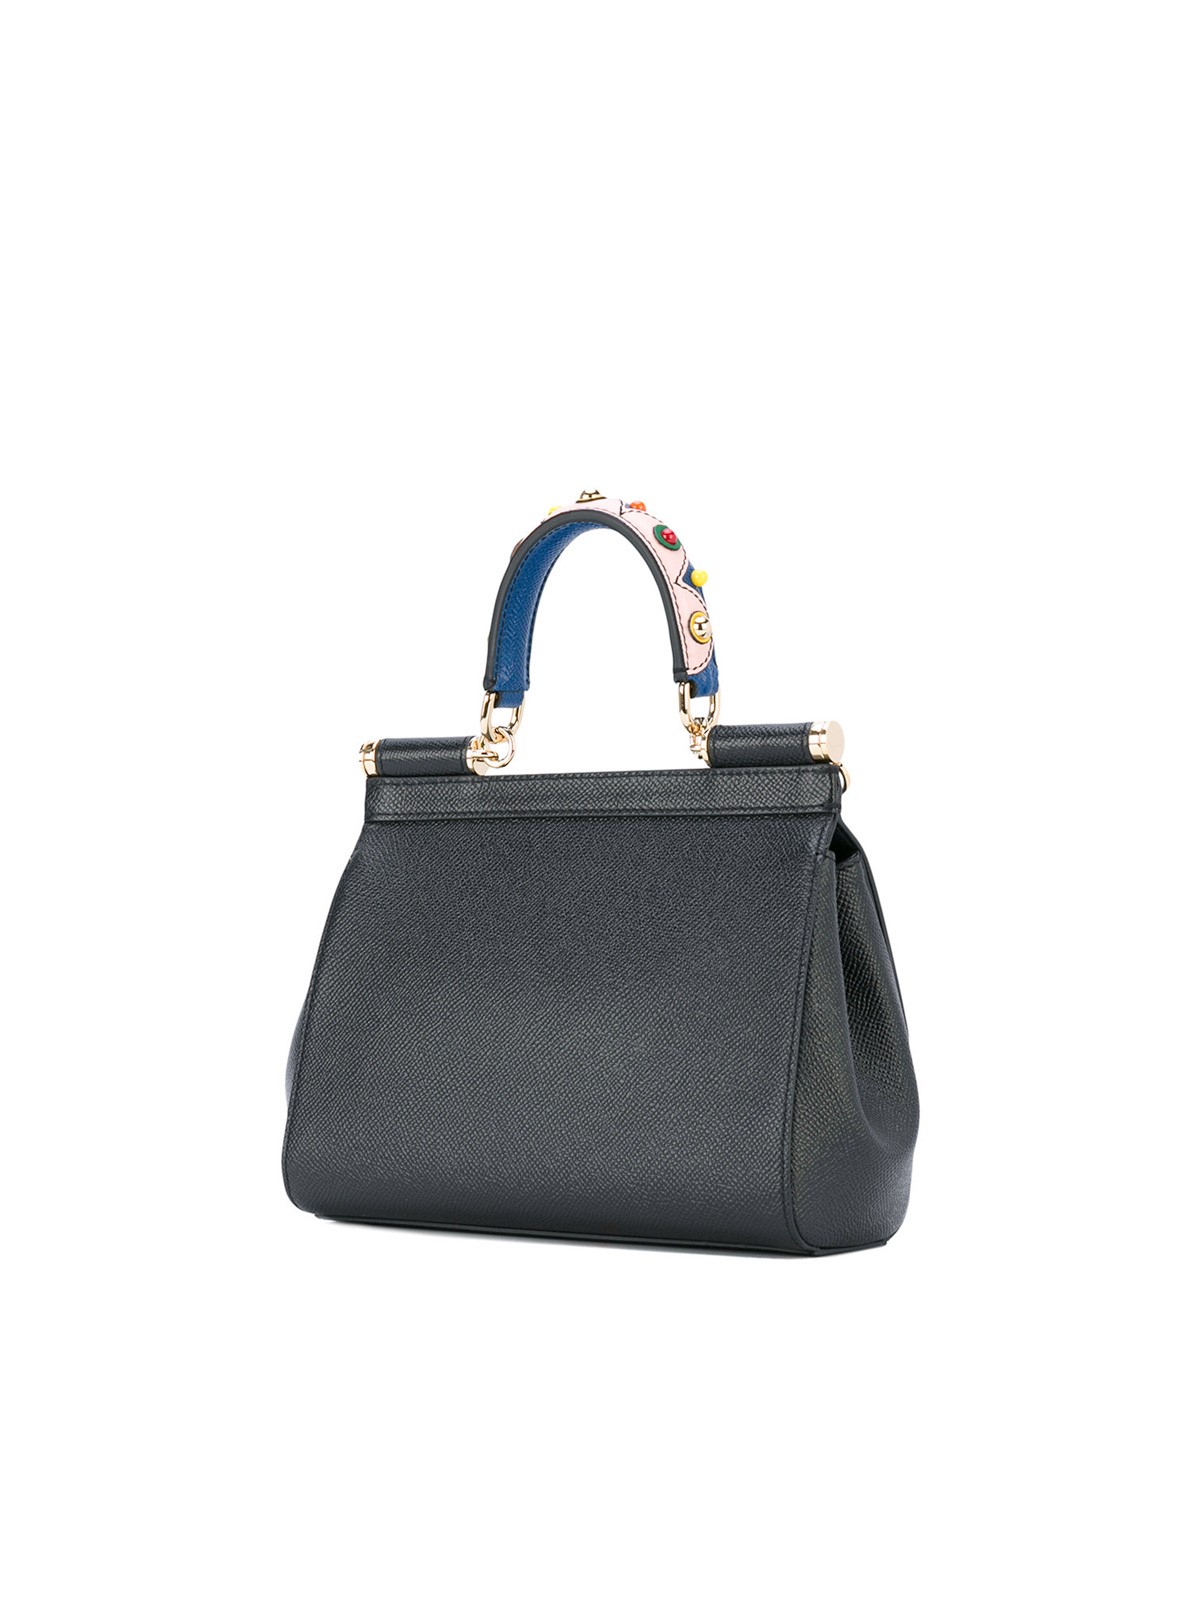 dolce & gabbana SICILY SMALL TOTE available on montiboutique.com - 22290